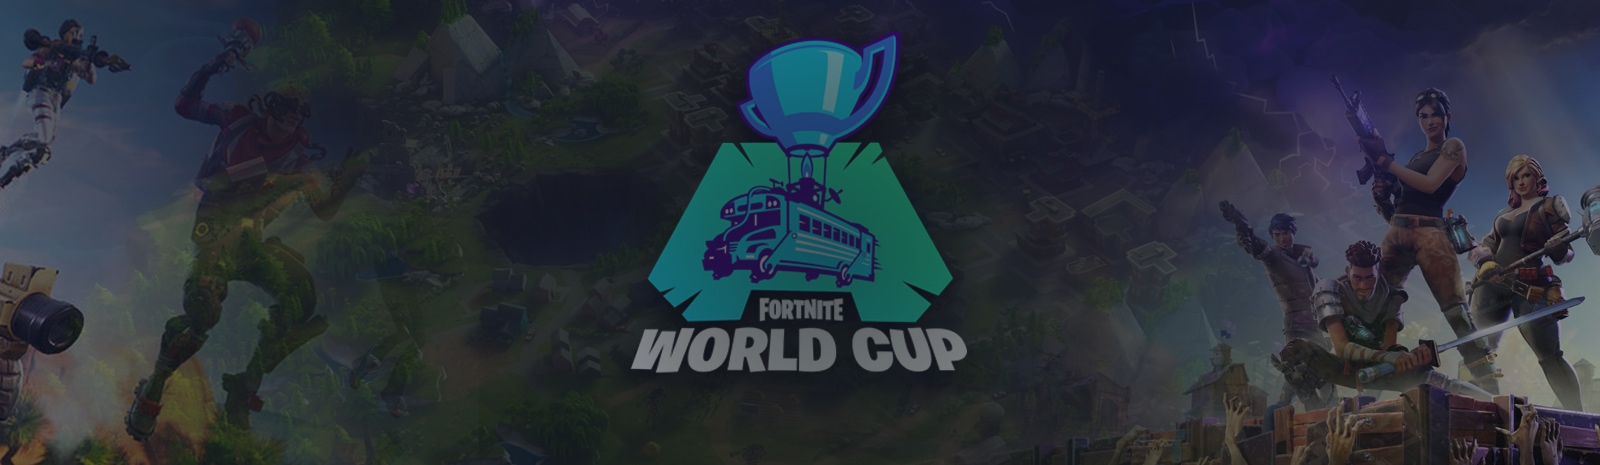 Fortnite World Cup 2019 Betting Preview